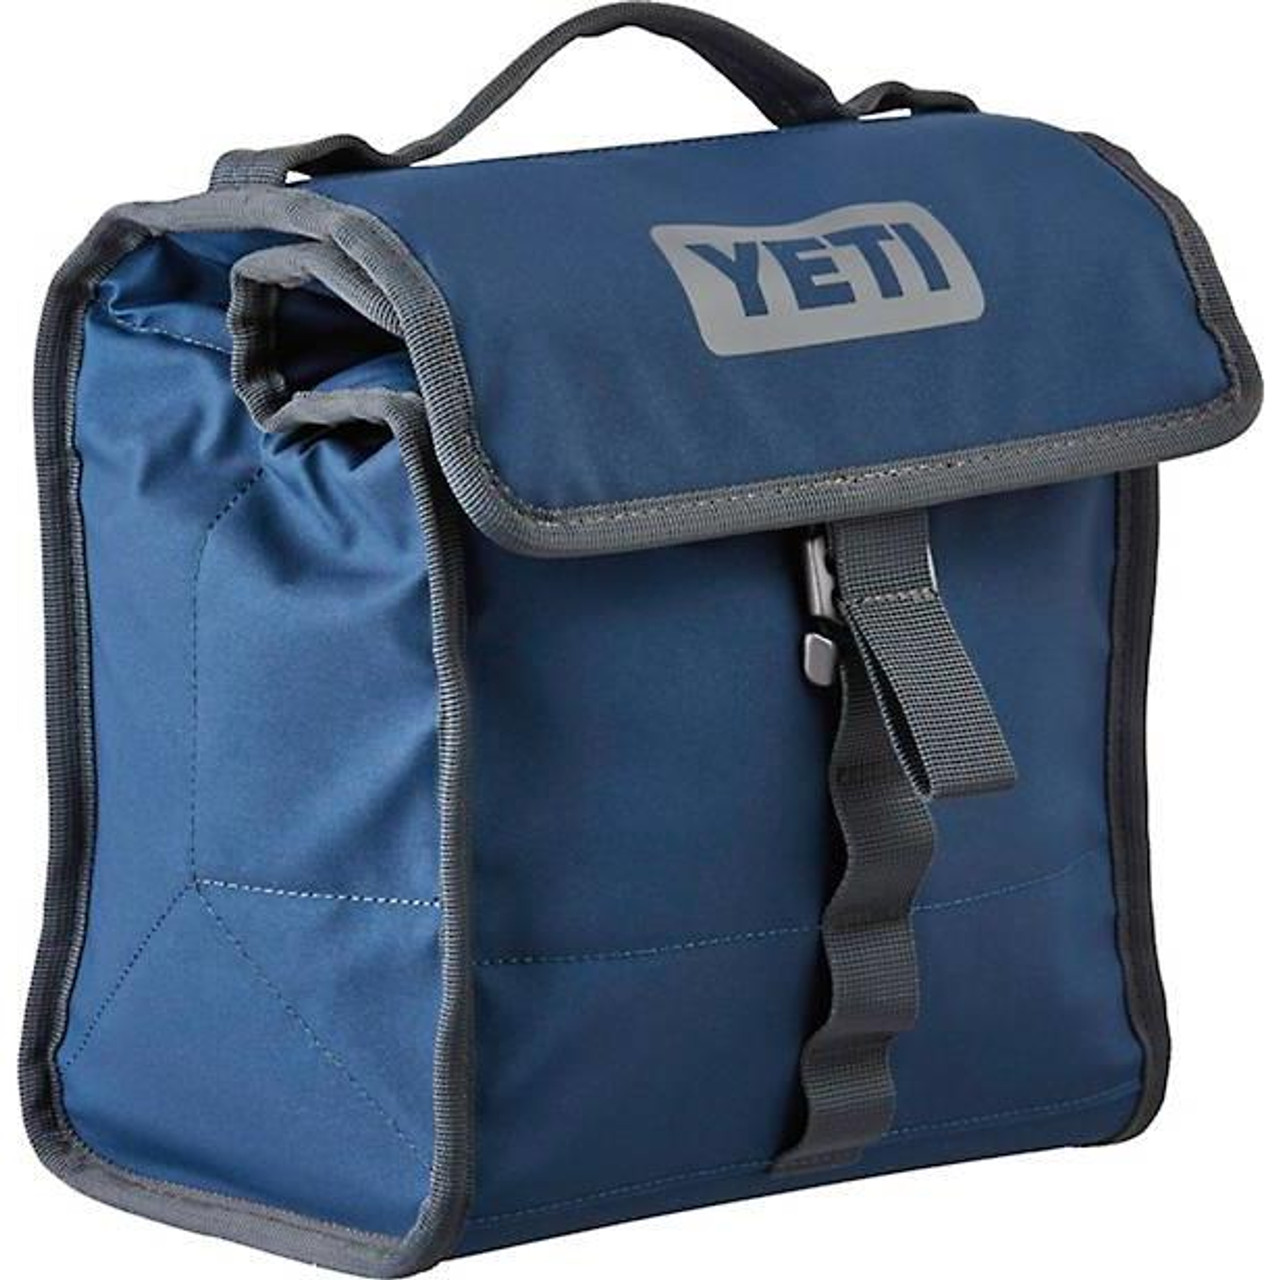 https://cdn11.bigcommerce.com/s-70mih4s/images/stencil/1280x1280/products/17089/43018/Yeti-Daytrip-Lunch-Bag-888830050576_image2__42450.1568778471.jpg?c=2